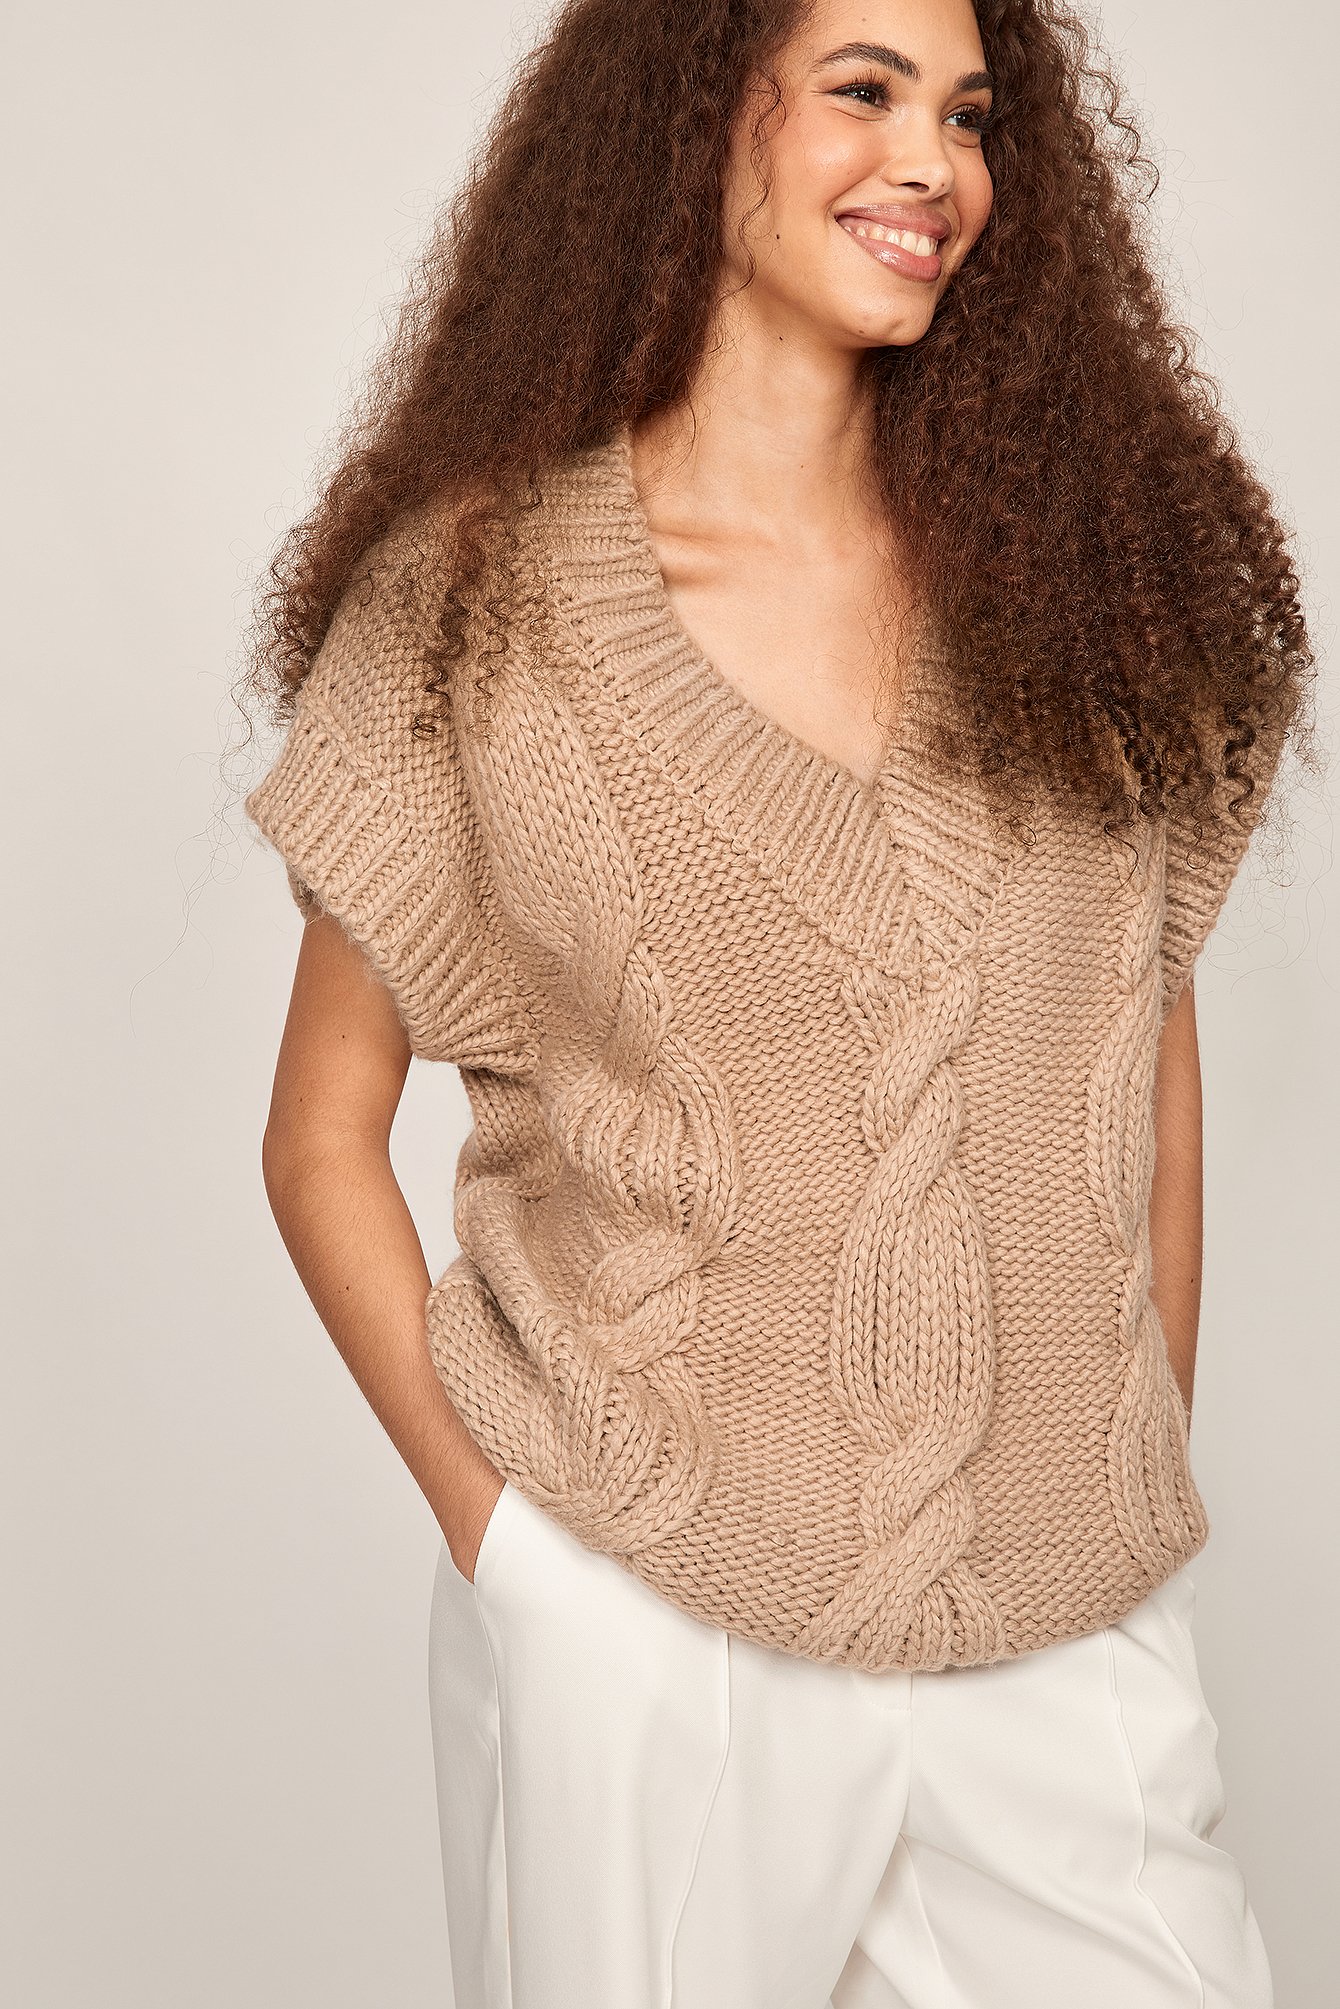 Beige Statement Chunky Cable Knit Vest